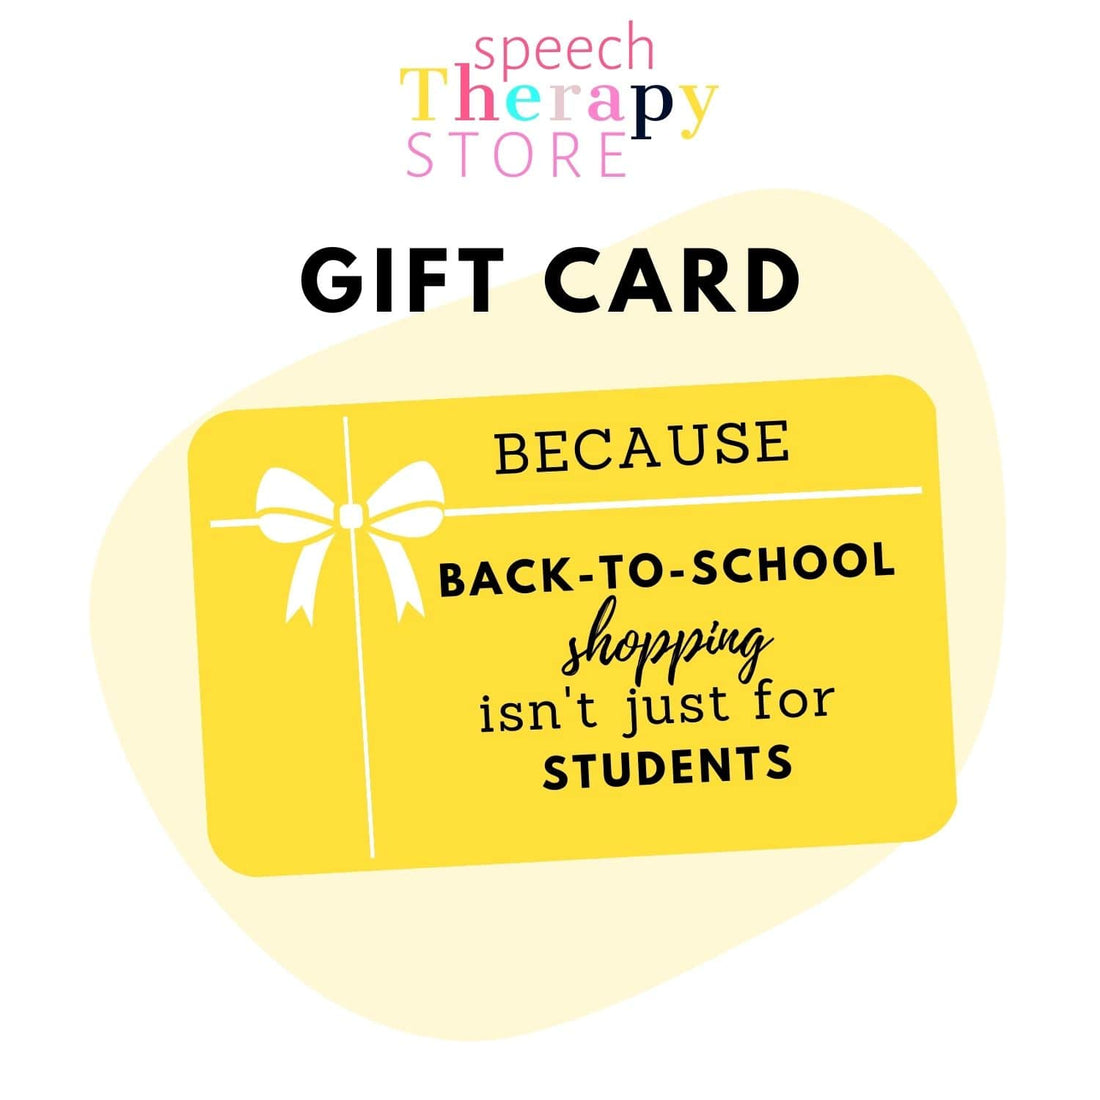 SPEECH THERAPY STORE GIFT CARD - YELLOW